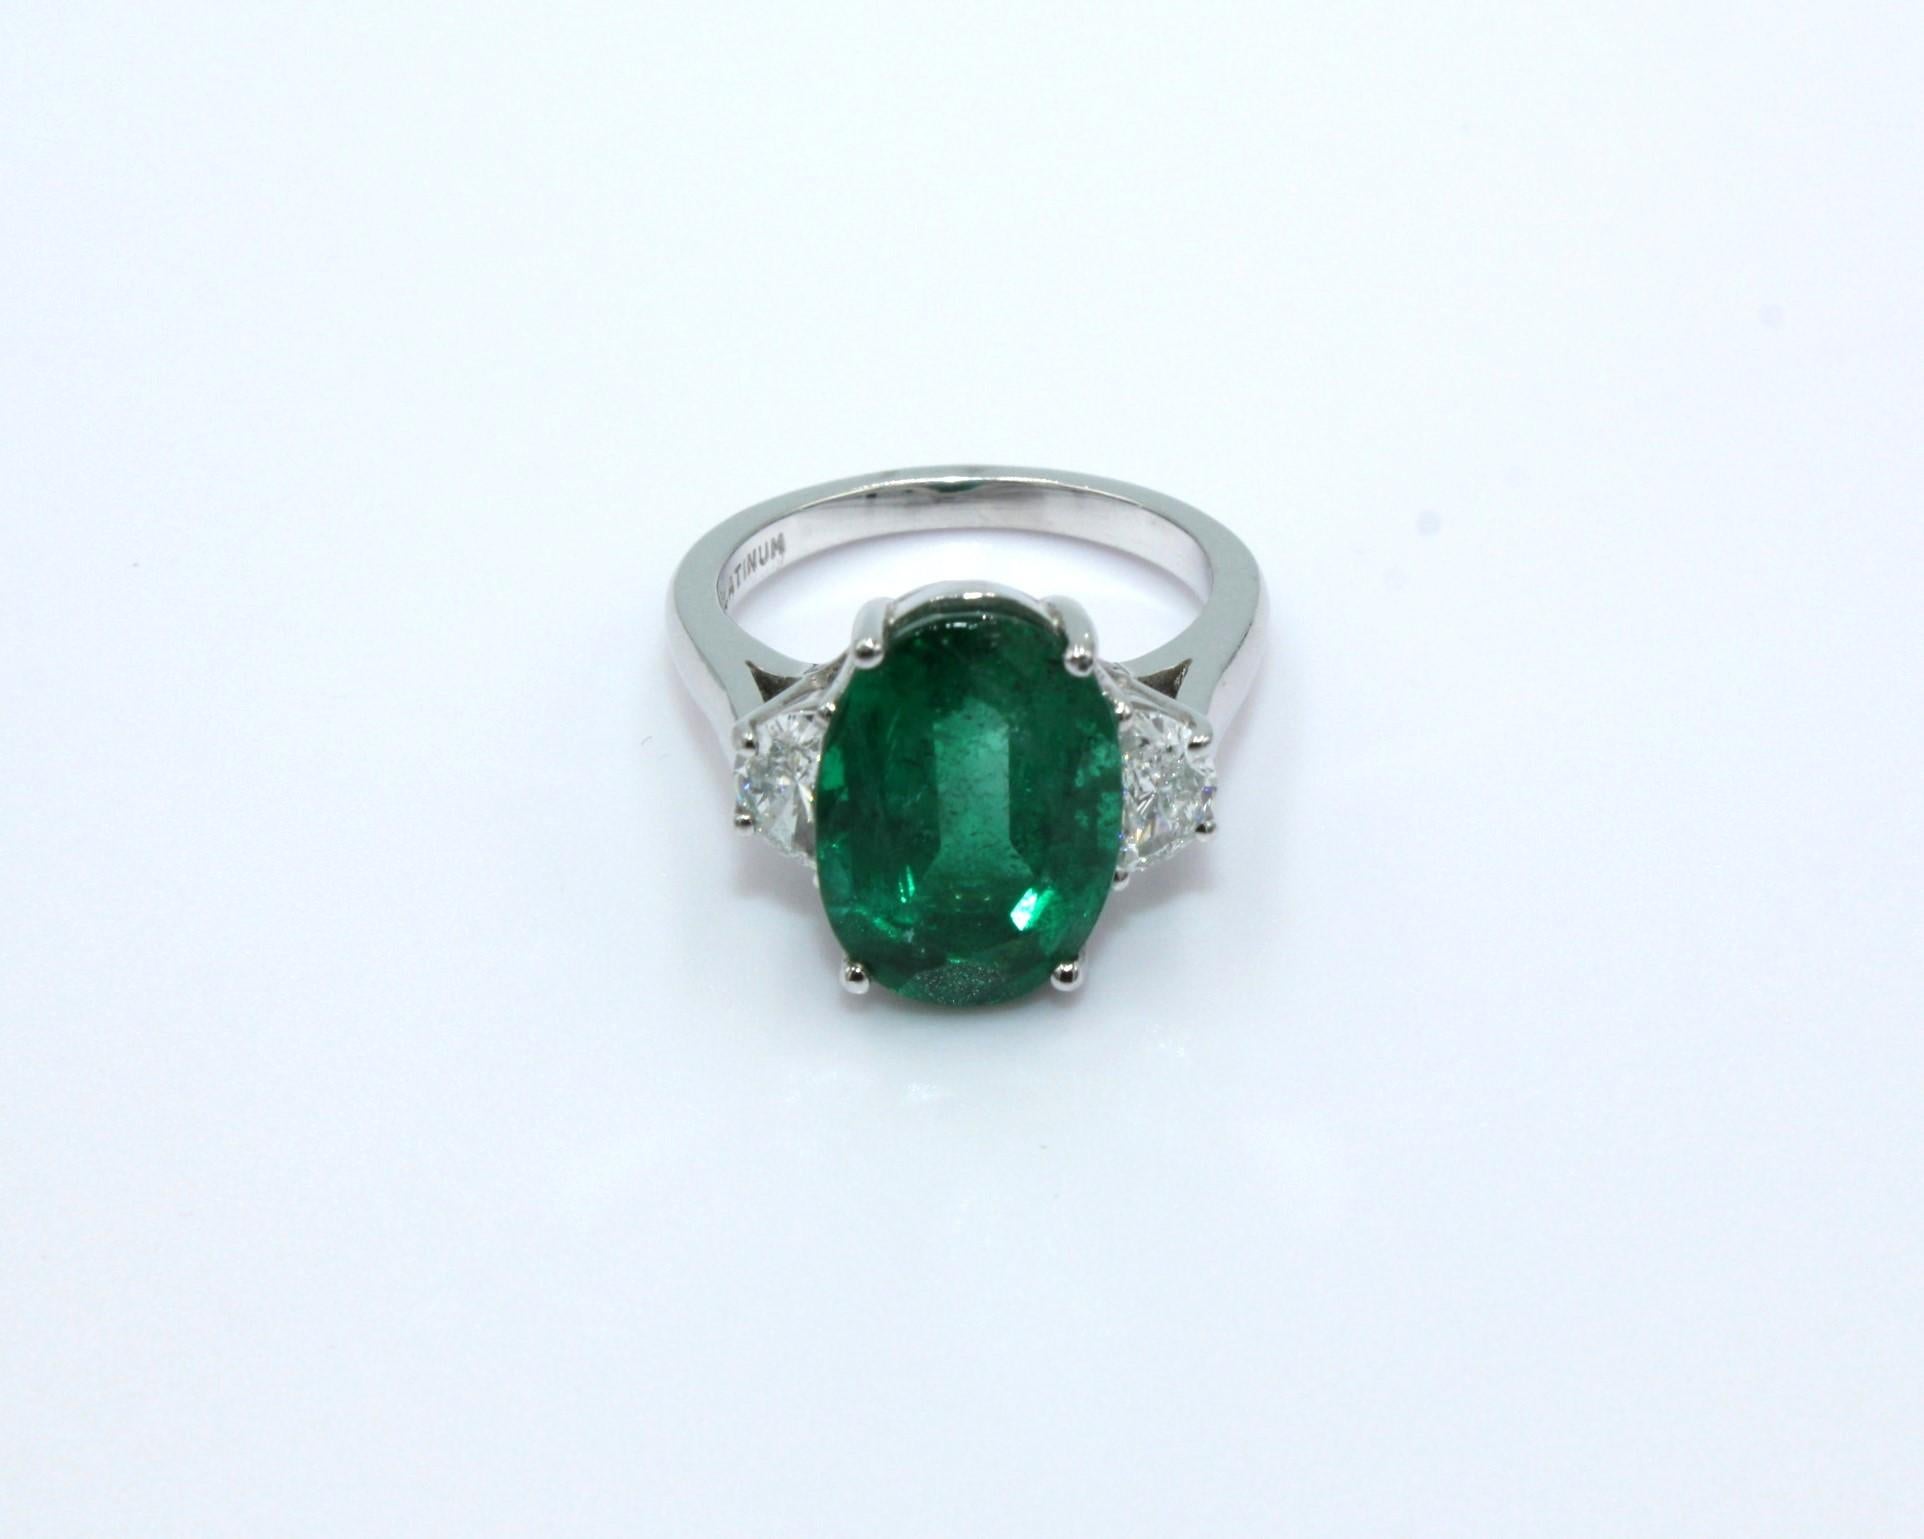 5.86 carats Oval Zambian Emerald with two Half-moon diamonds on both sides, totaling a diamond weight of 0.72 carat. 

This stunning Emerald Diamond Ring will highlight your elegance and uniqueness. 

Item Details:
- Type: Ring
- Metal: Platinum
-